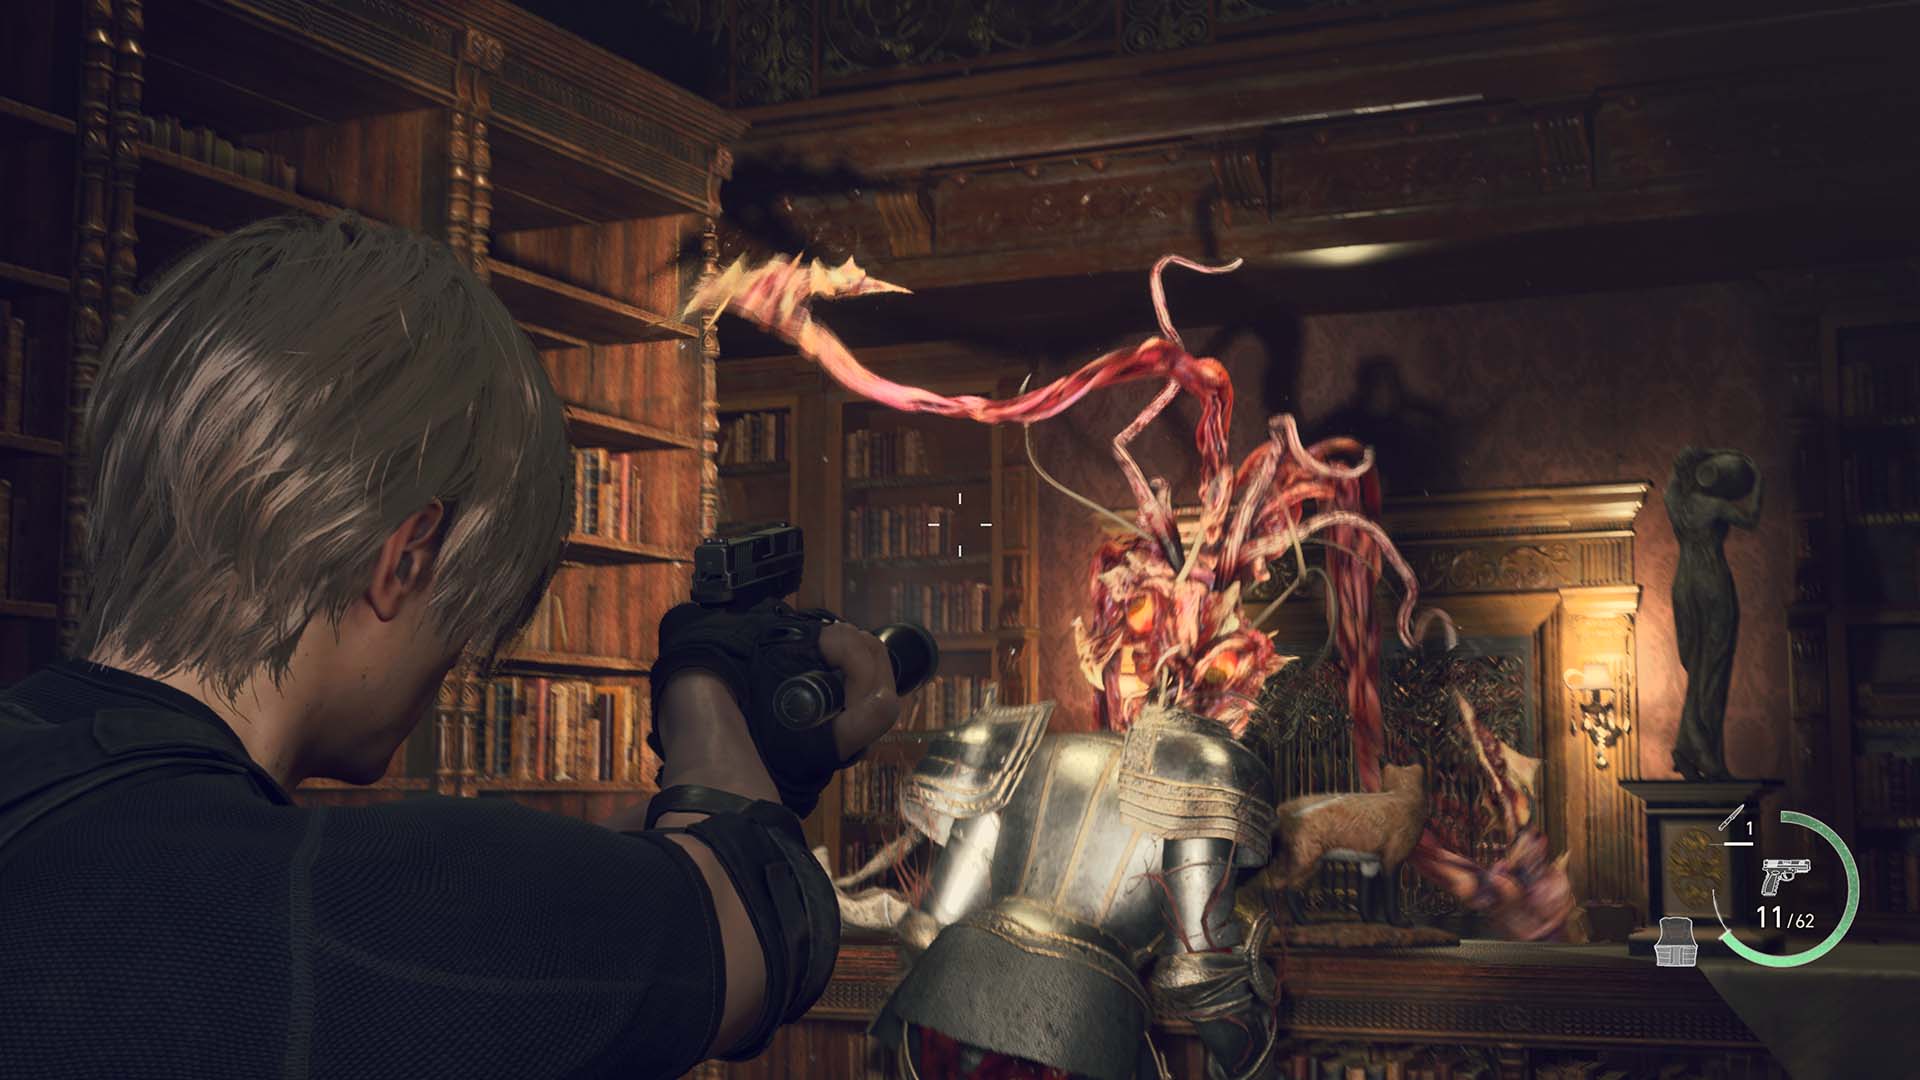 Buy Resident Evil HD Remaster from the Humble Store